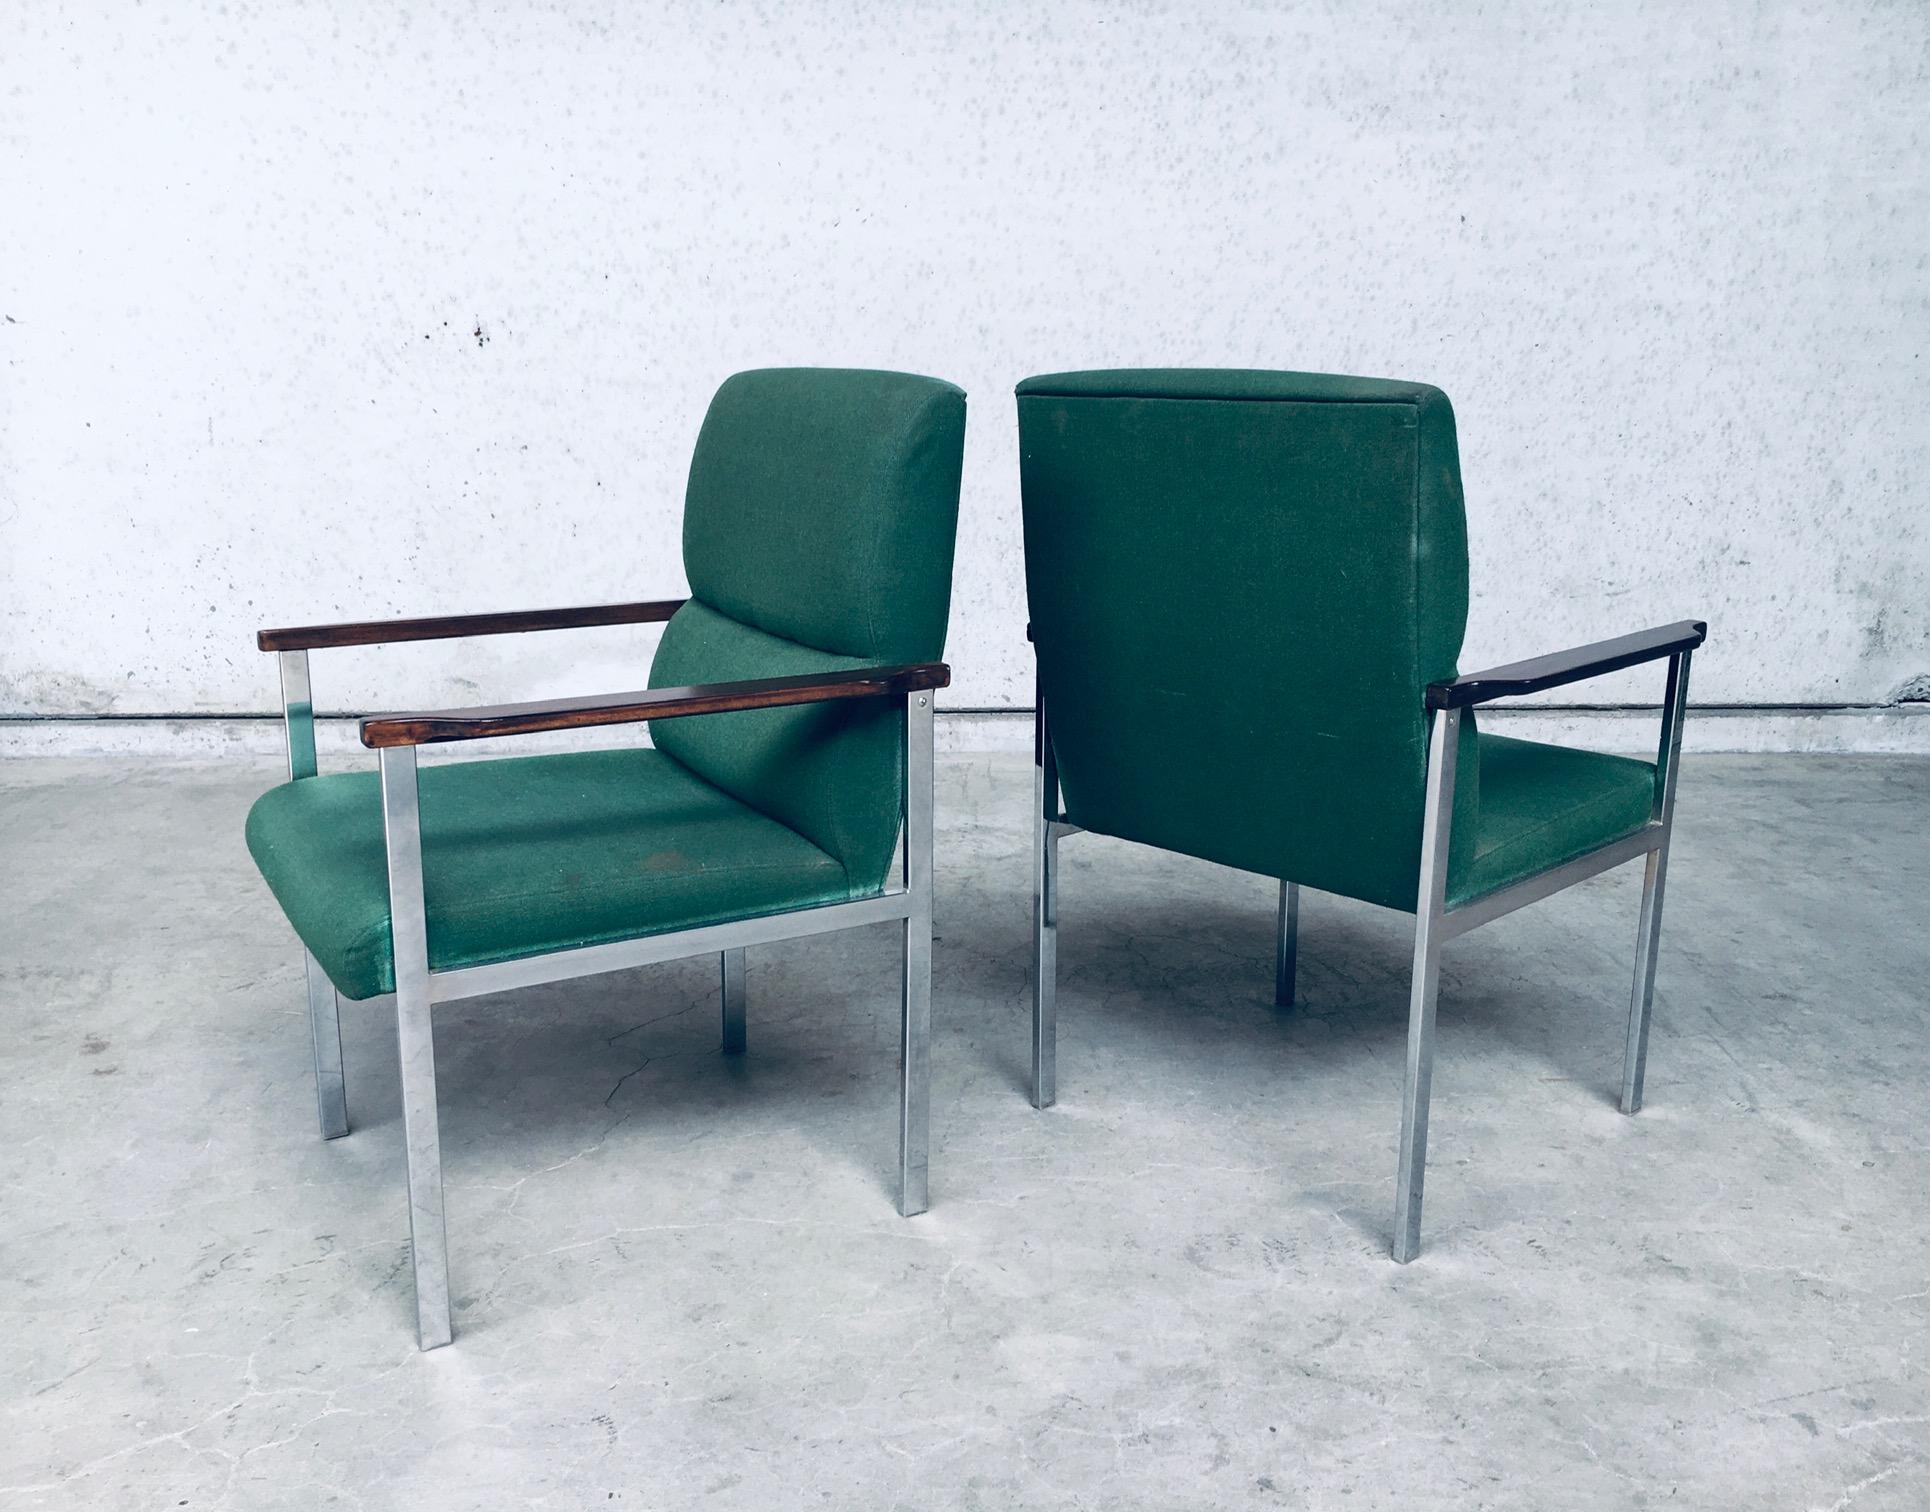 Mid-20th Century Midcentury Modern Design Pair of Office Arm Chairs by Brune, Germany 1960's For Sale